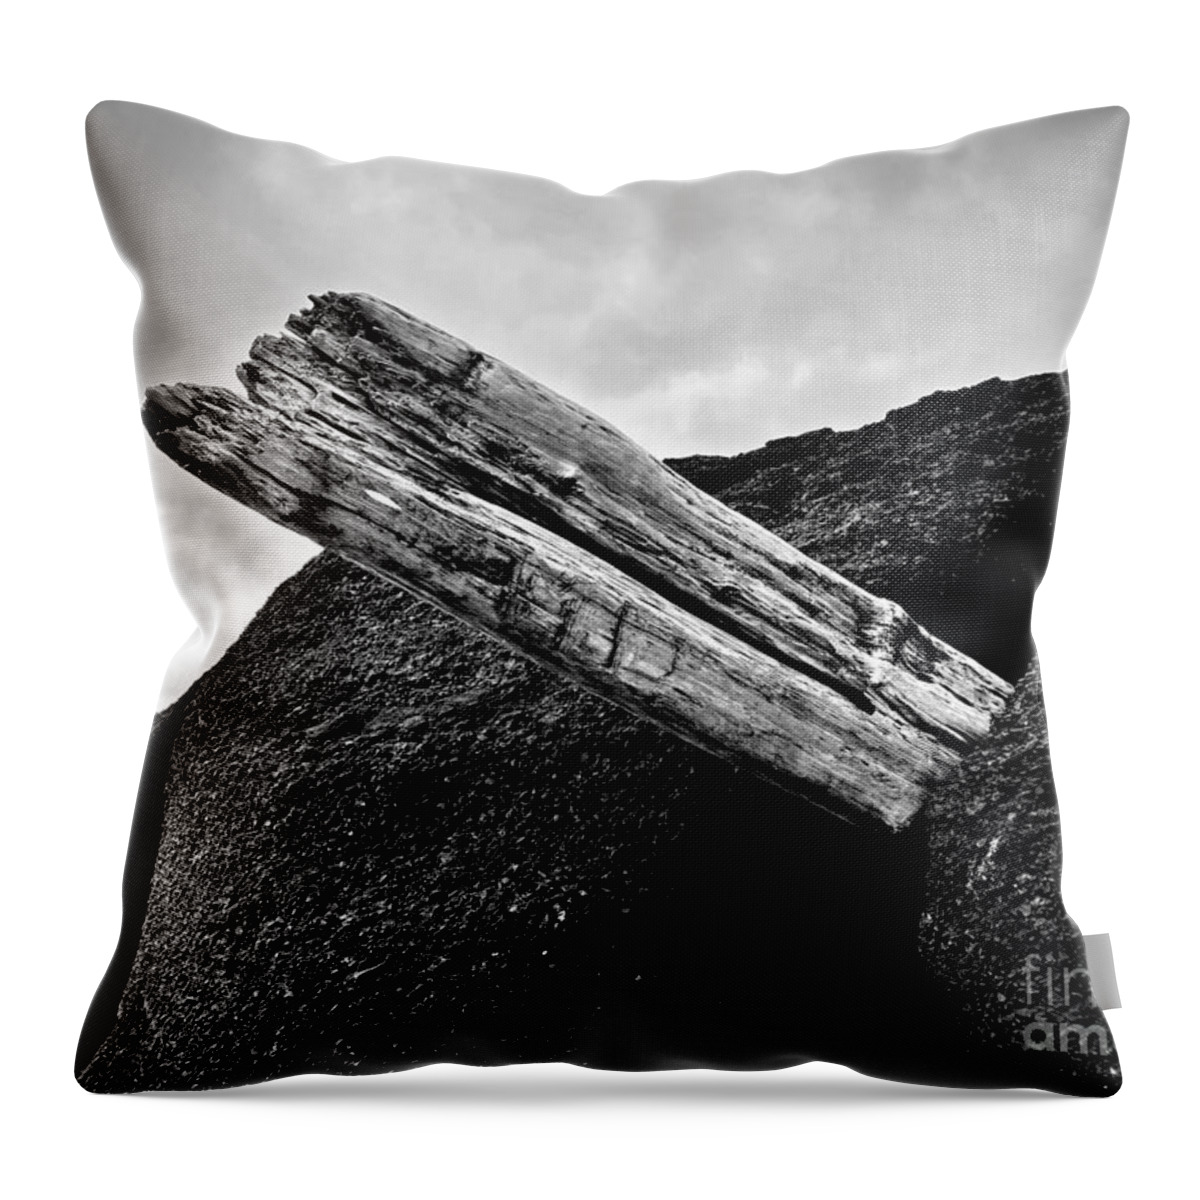 Driftwood Throw Pillow featuring the photograph Forever Stuck by Michael Cinnamond